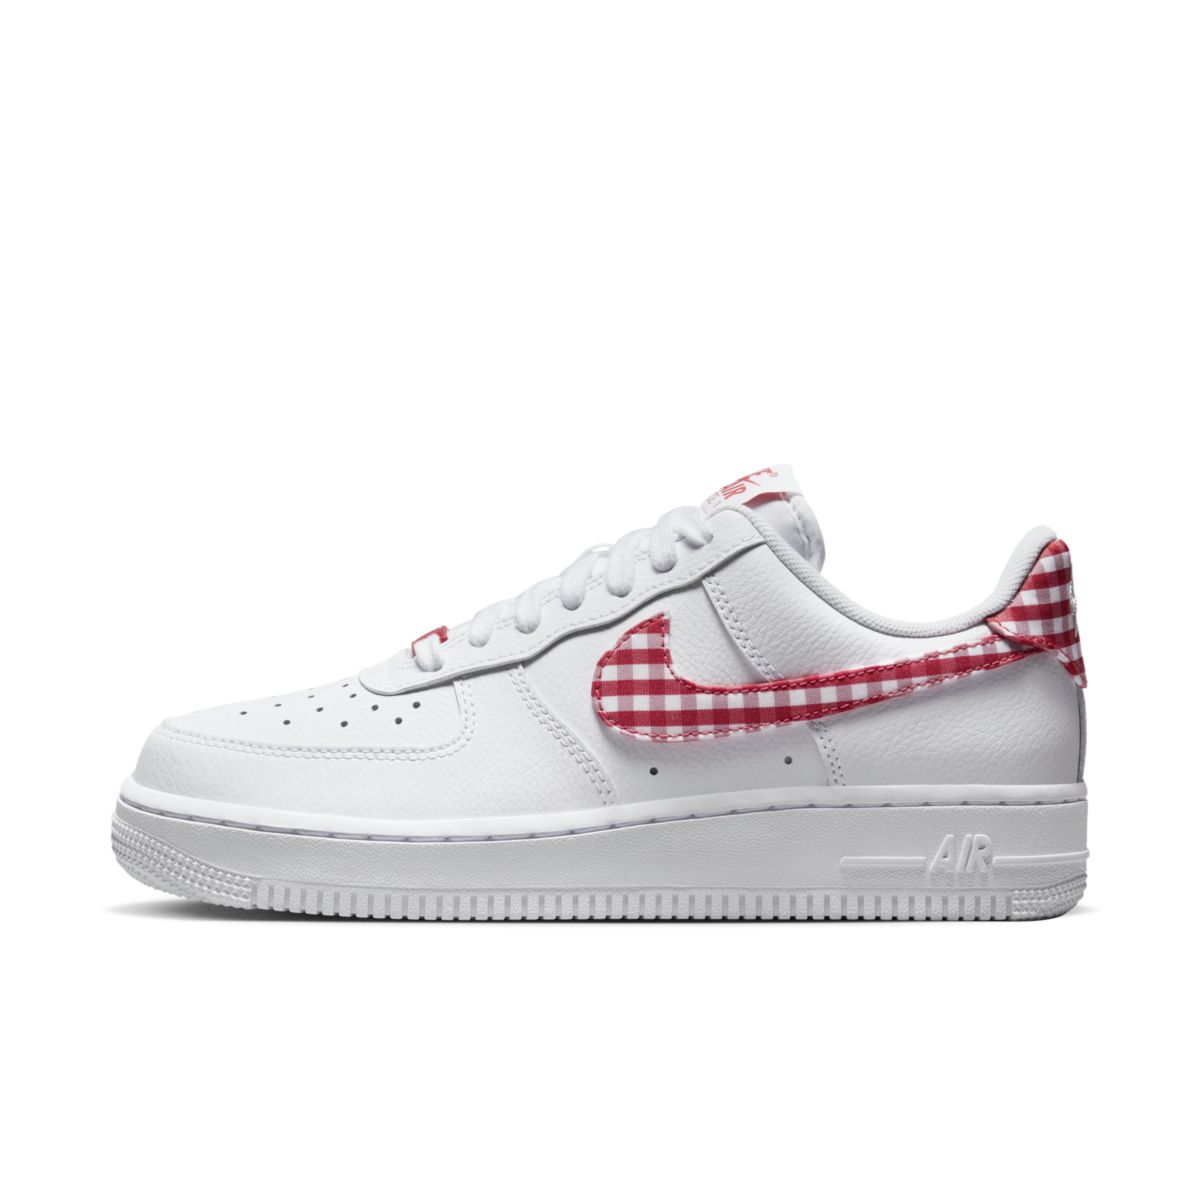 Nike Air Force 1 Low WMNS Red Gingham DZ2784-101 2